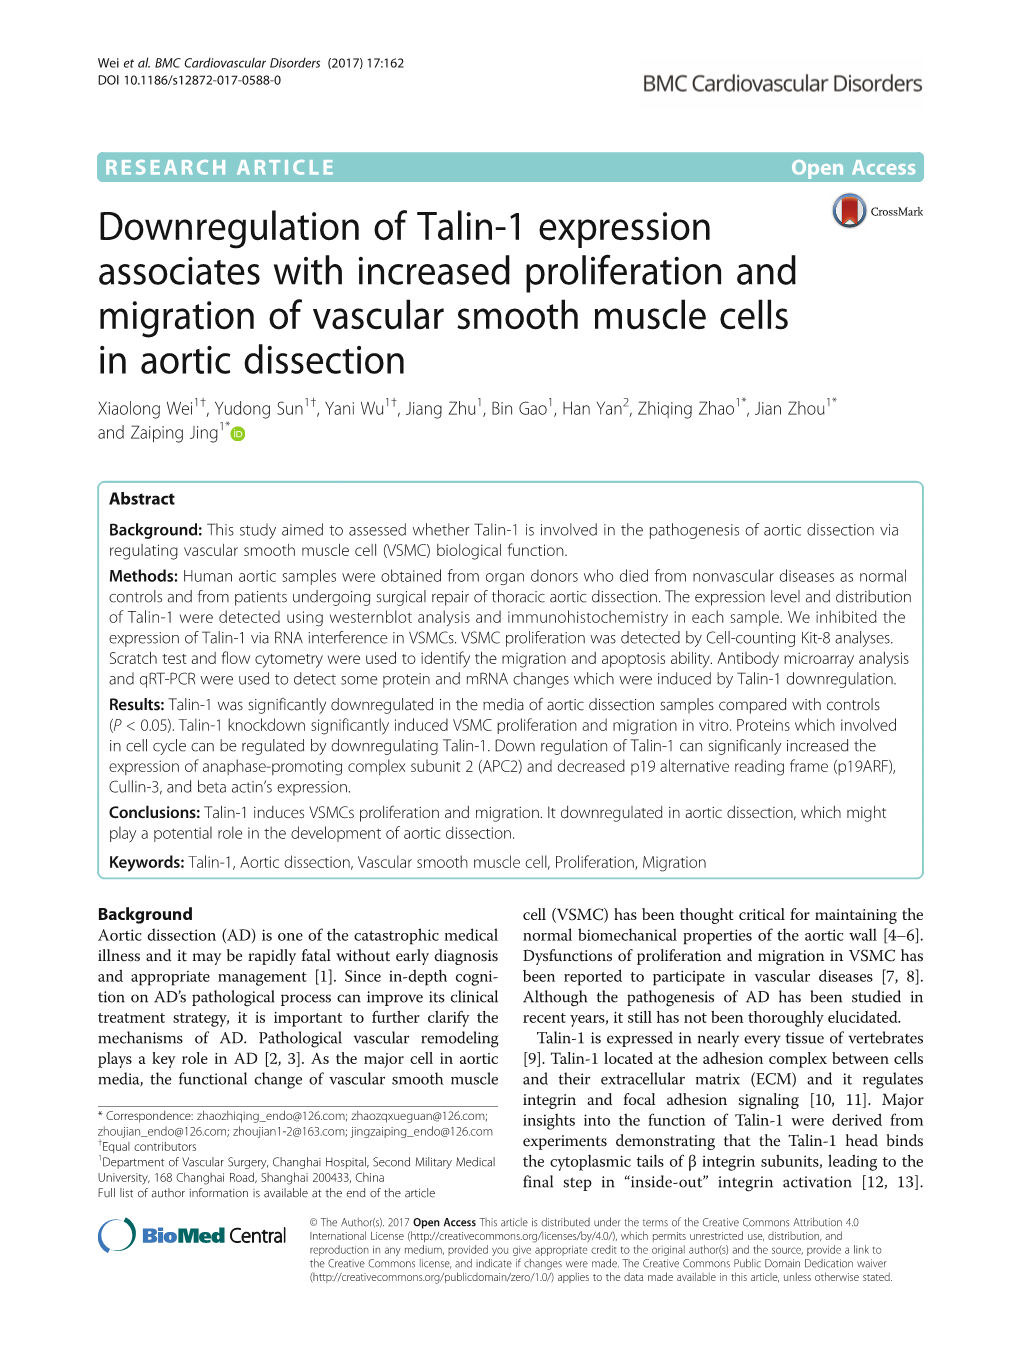 Downregulation of Talin-1 Expression Associates with Increased Proliferation and Migration of Vascular Smooth Muscle Cells in Ao